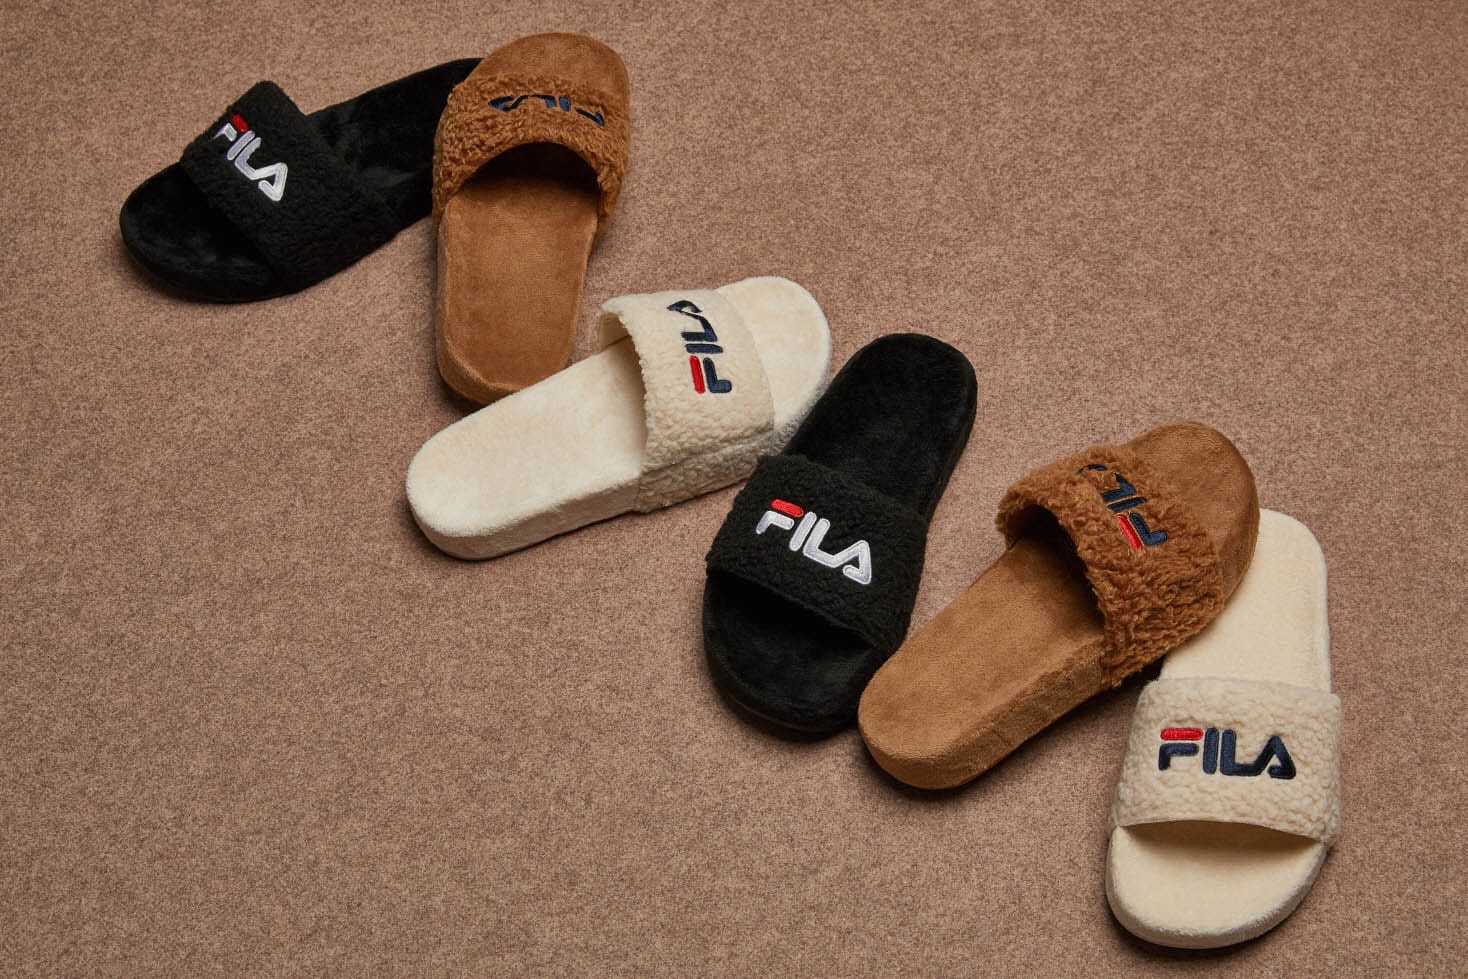 FILA Furry Slides in Brown, Black and 